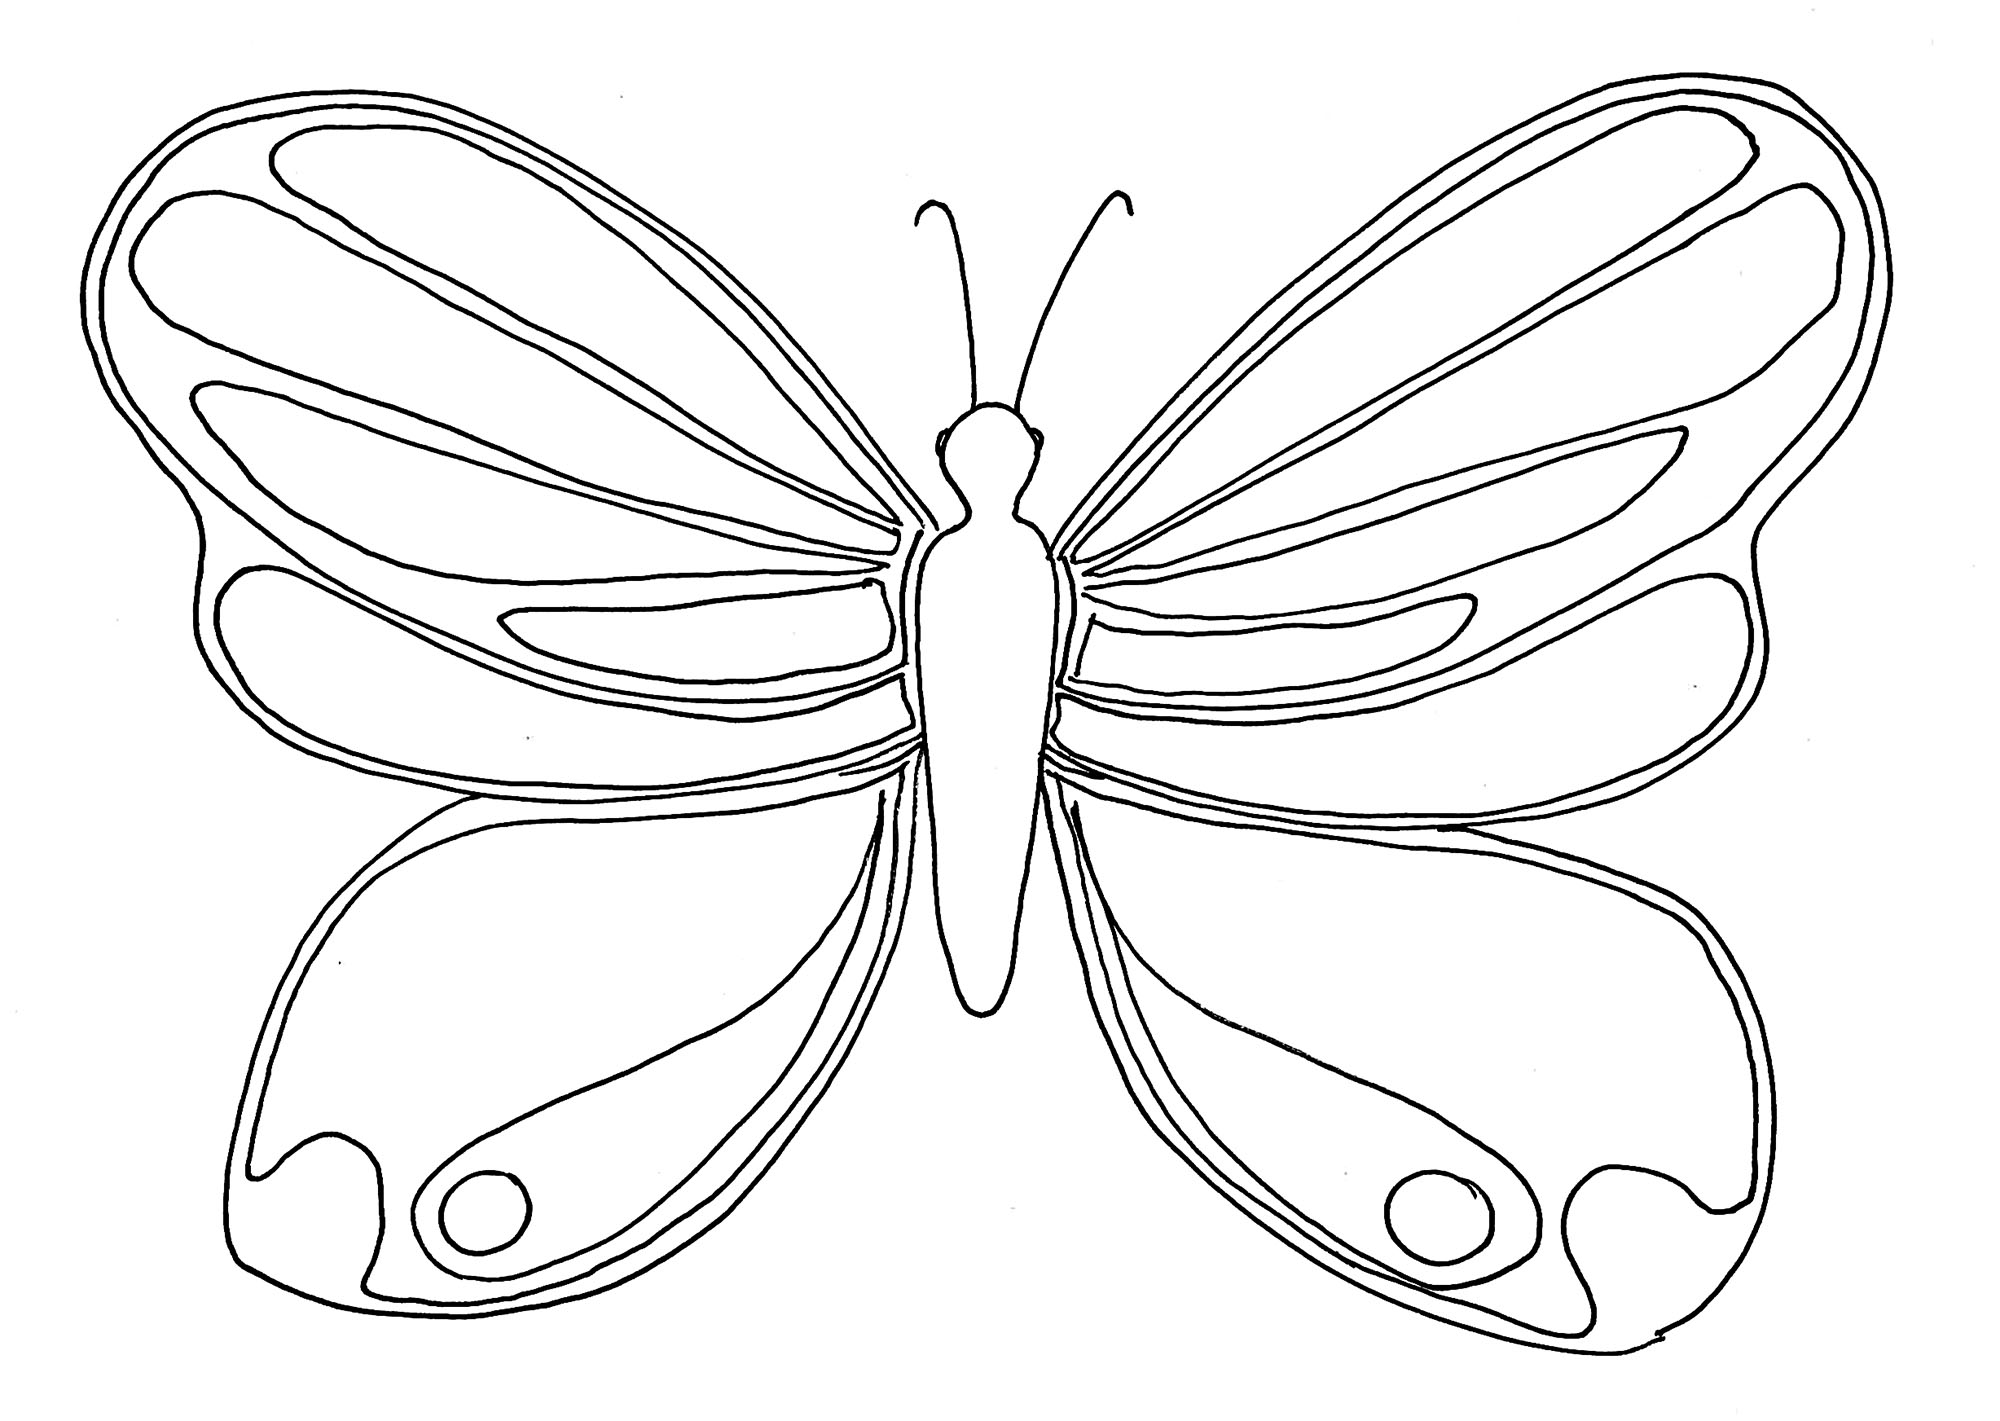 Butterflies to color for kids - Butterflies Kids Coloring ...